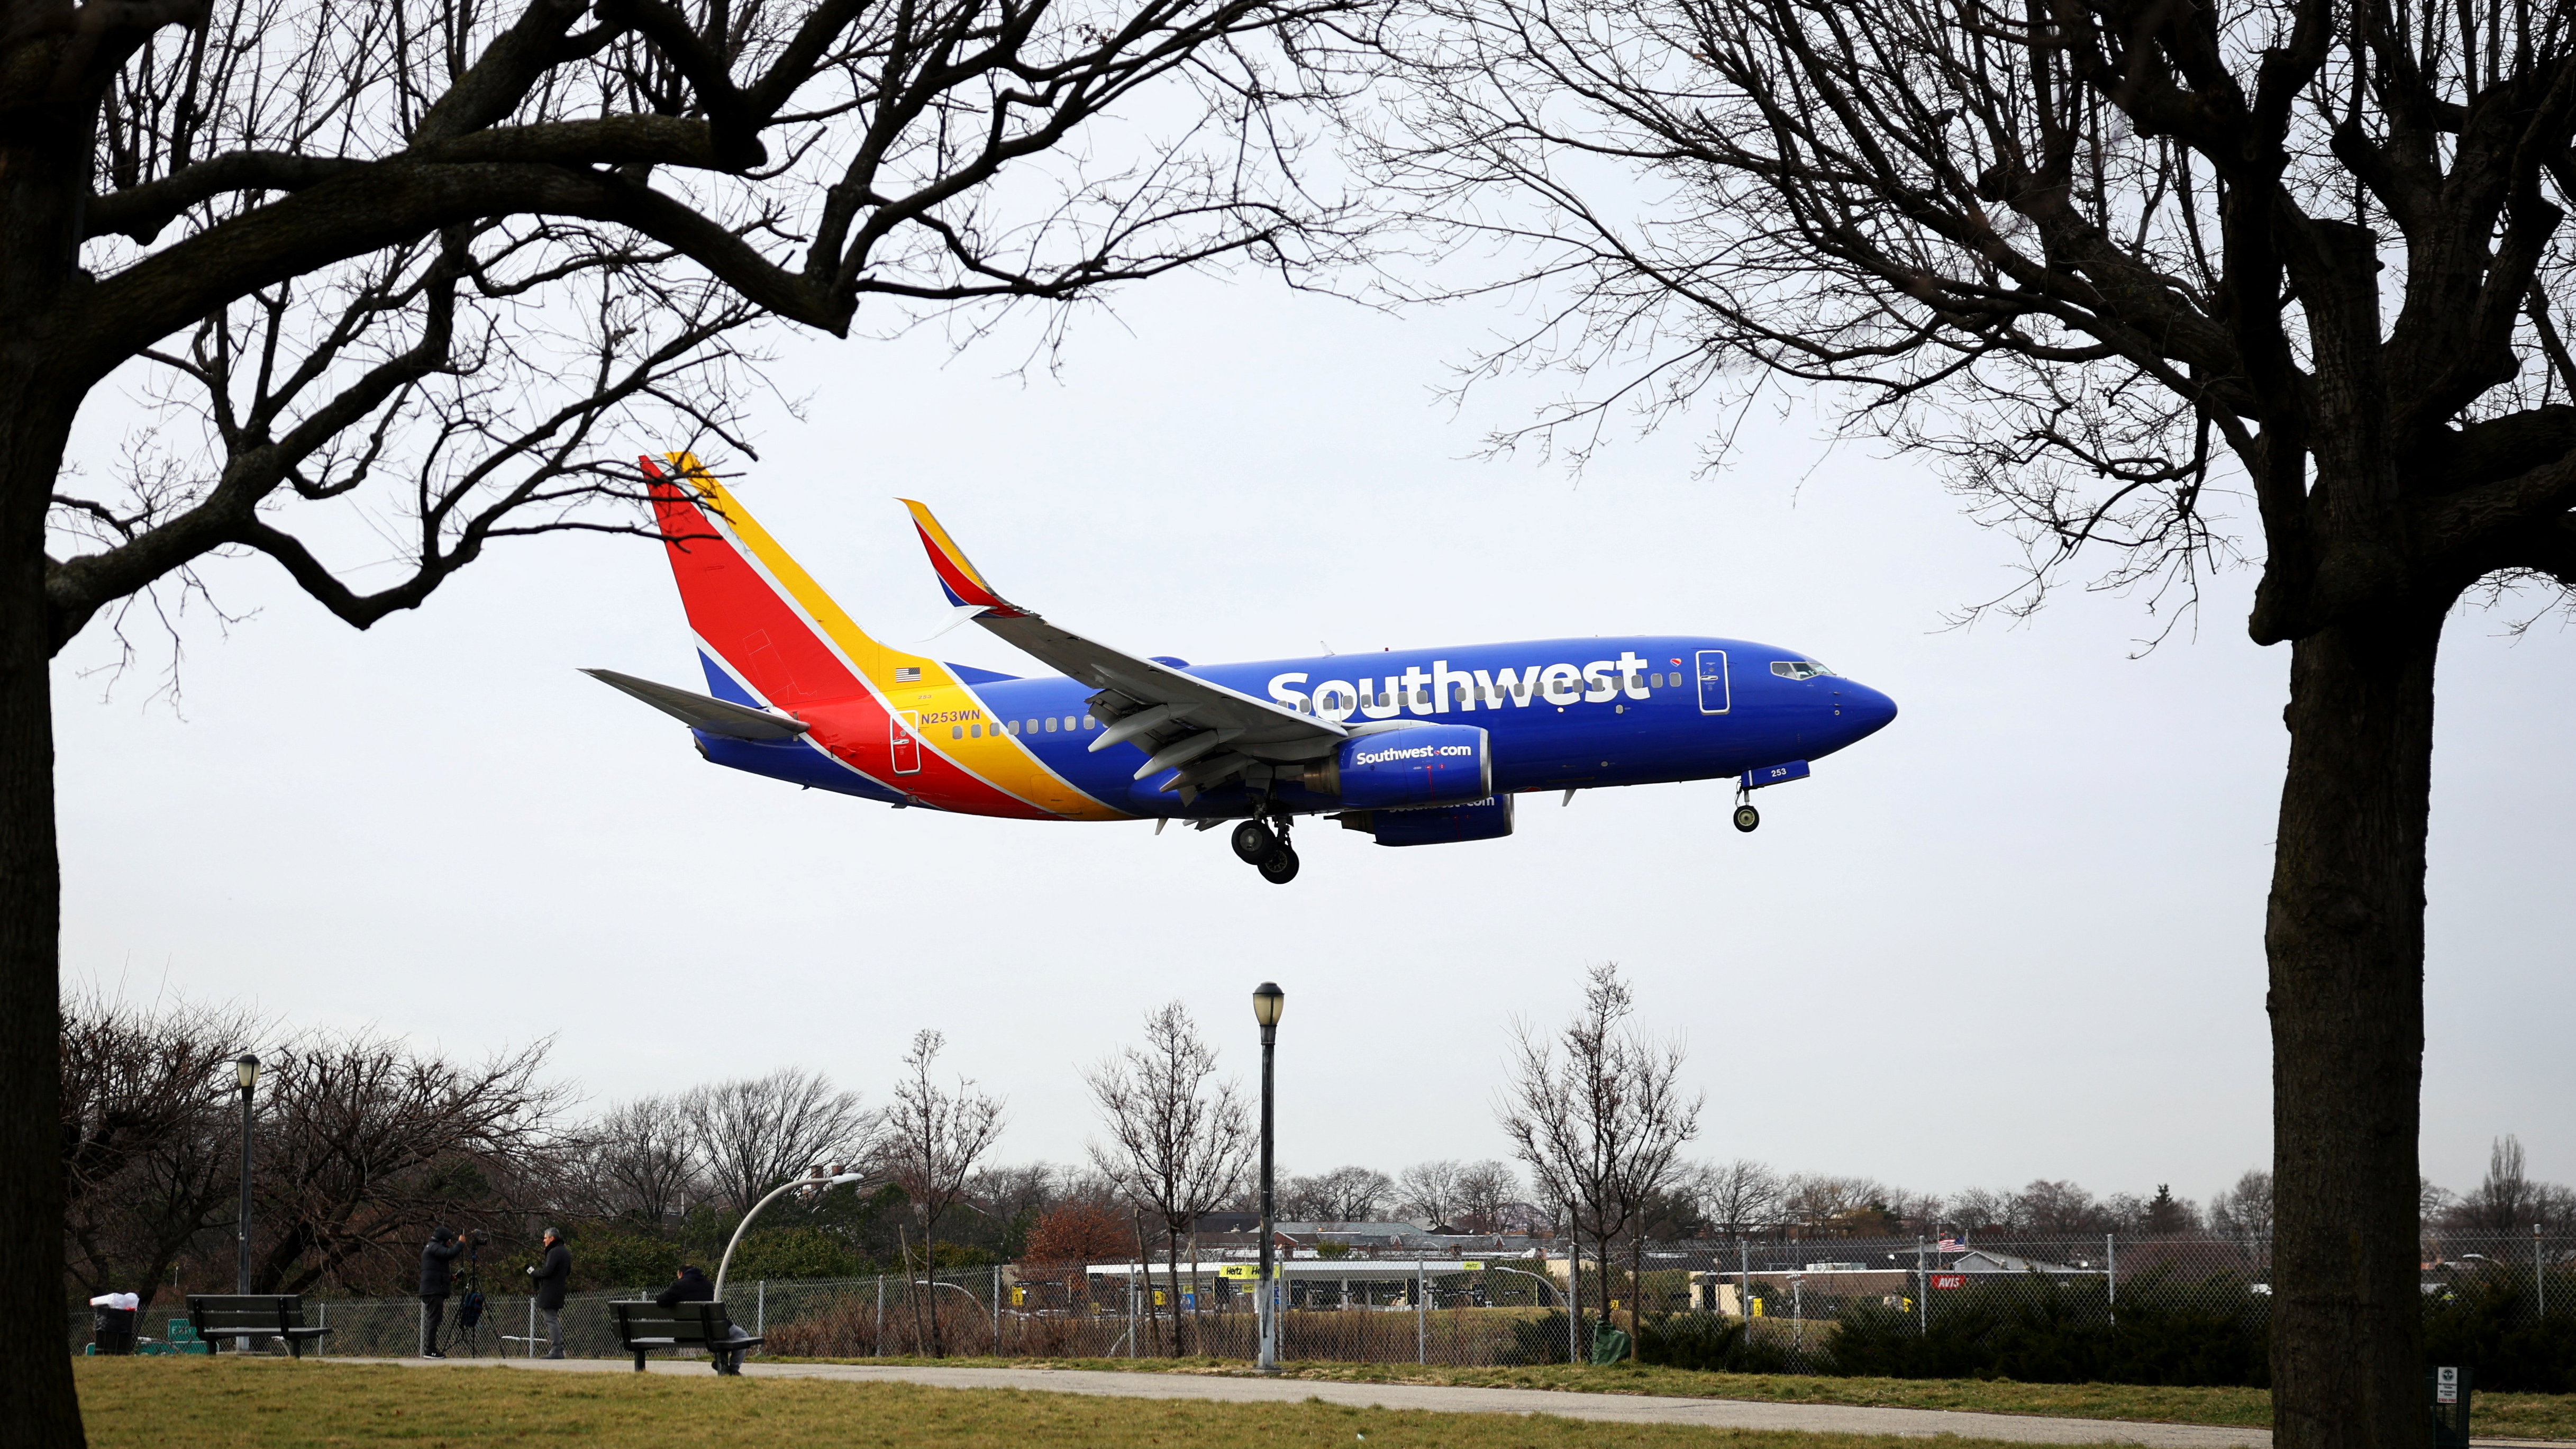 A Southwest Airlines jet comes in to land at New York's LaGuardia Airport on Wednesday. /Mike Segar/Reuters